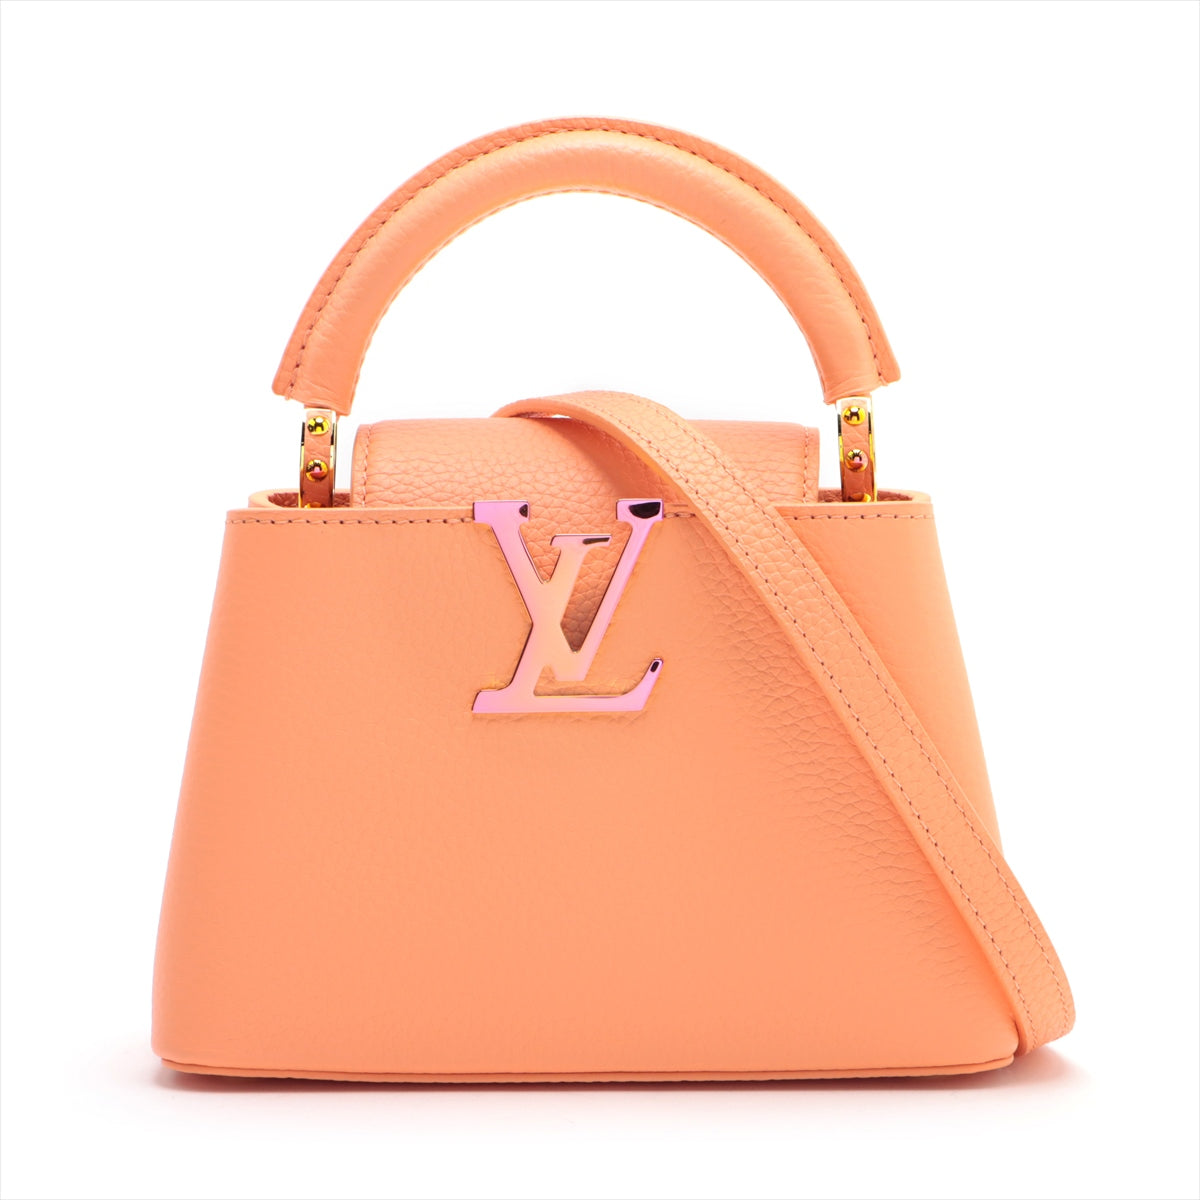 Louis Vuitton Taurillon CapucinesMINI M22606 There was an RFID response